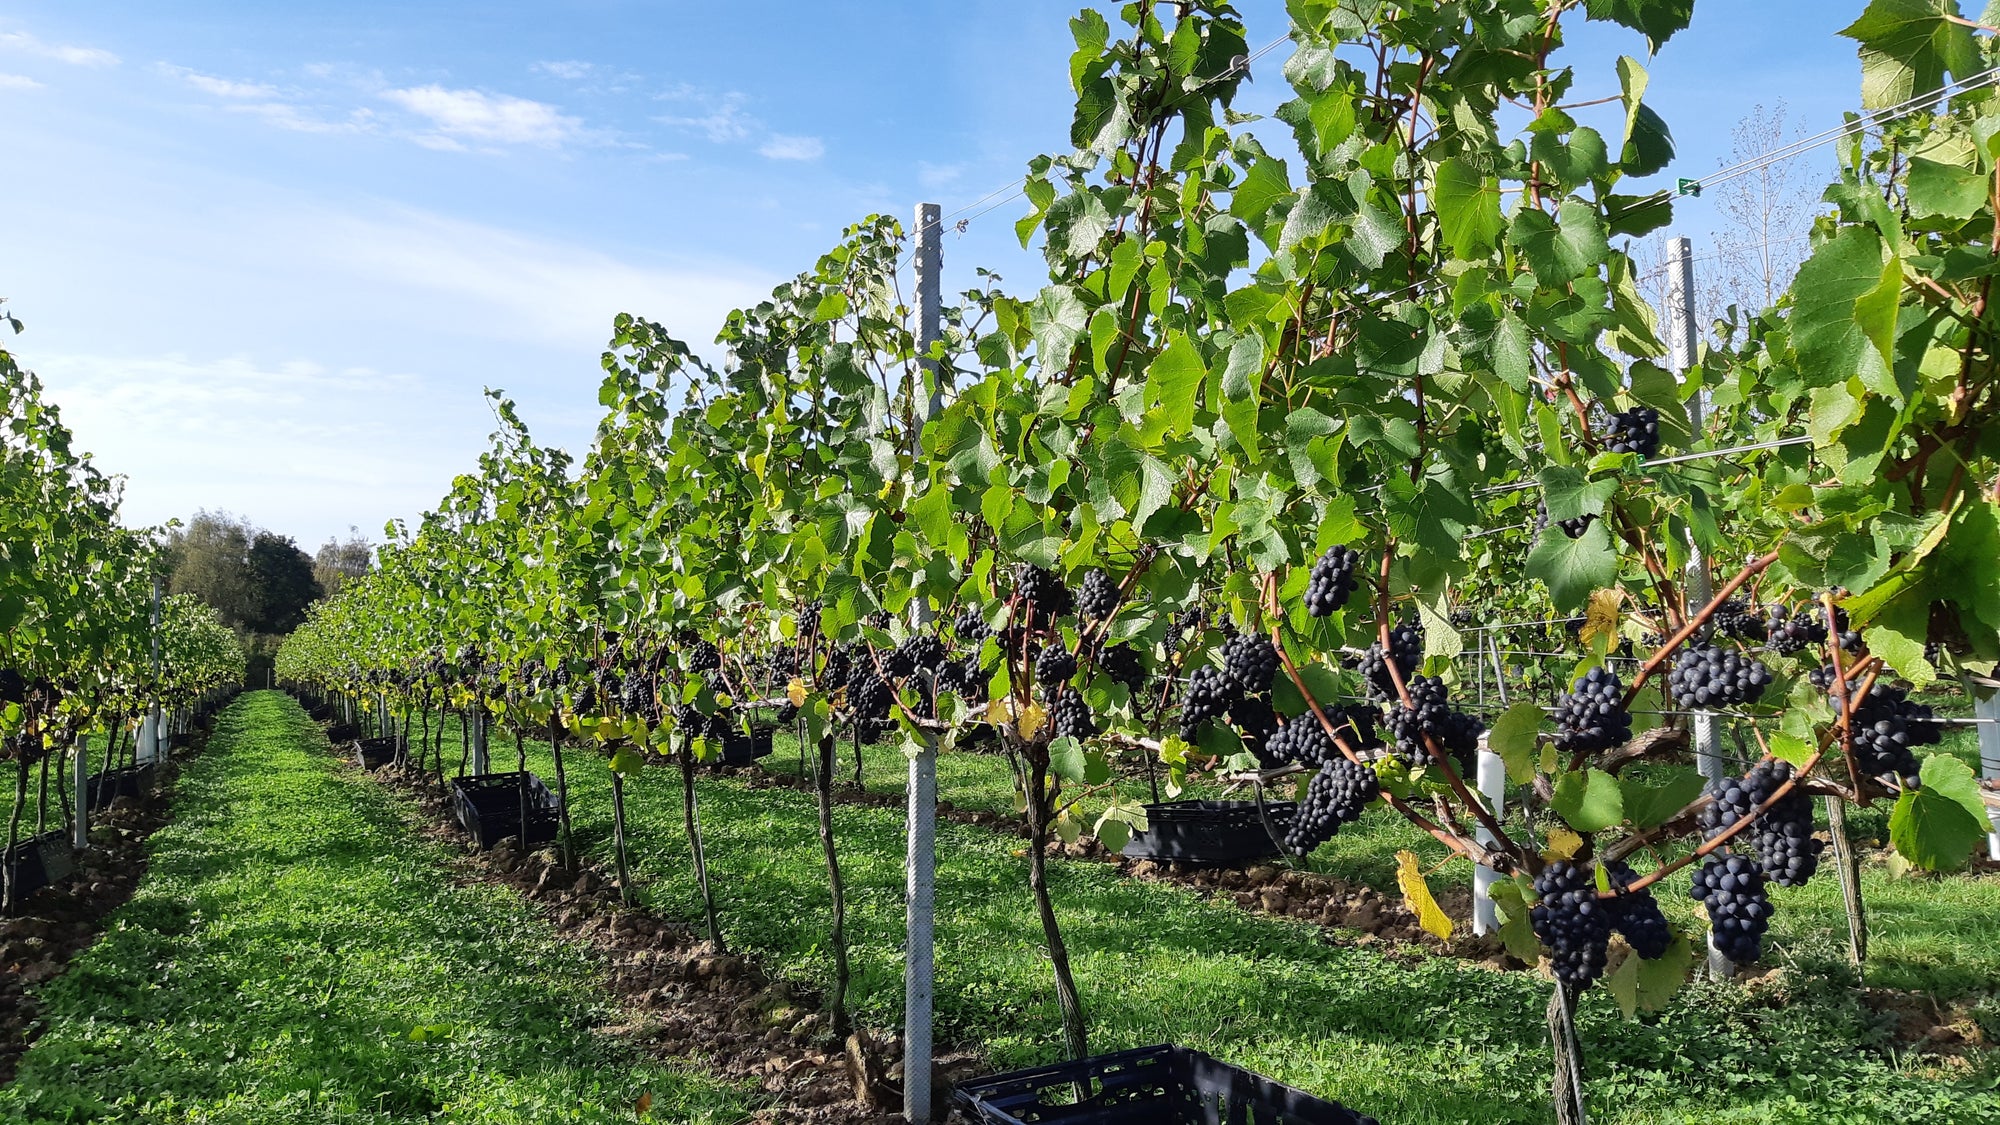 Choosing the Right Trellis System for your Vineyard